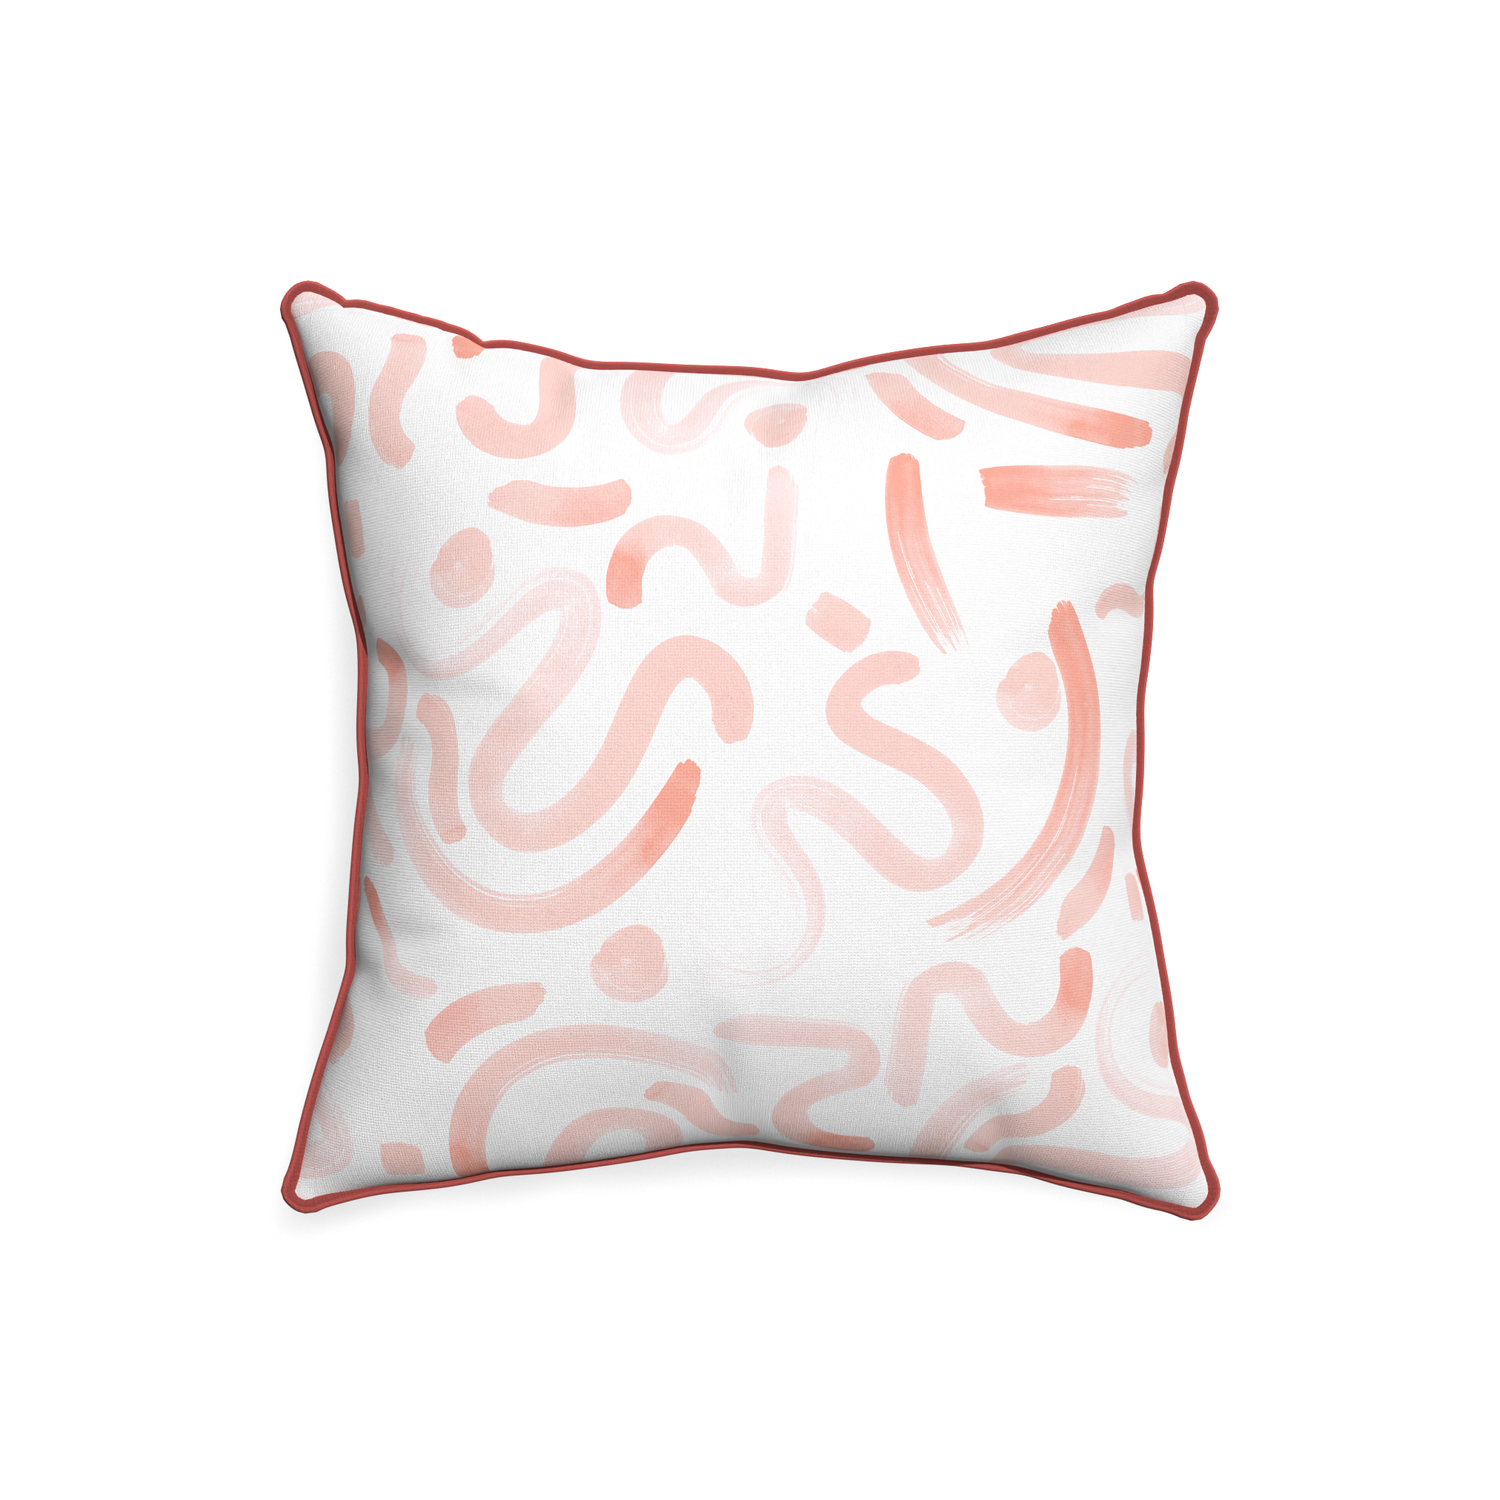 20-square hockney pink custom pink graphicpillow with c piping on white background